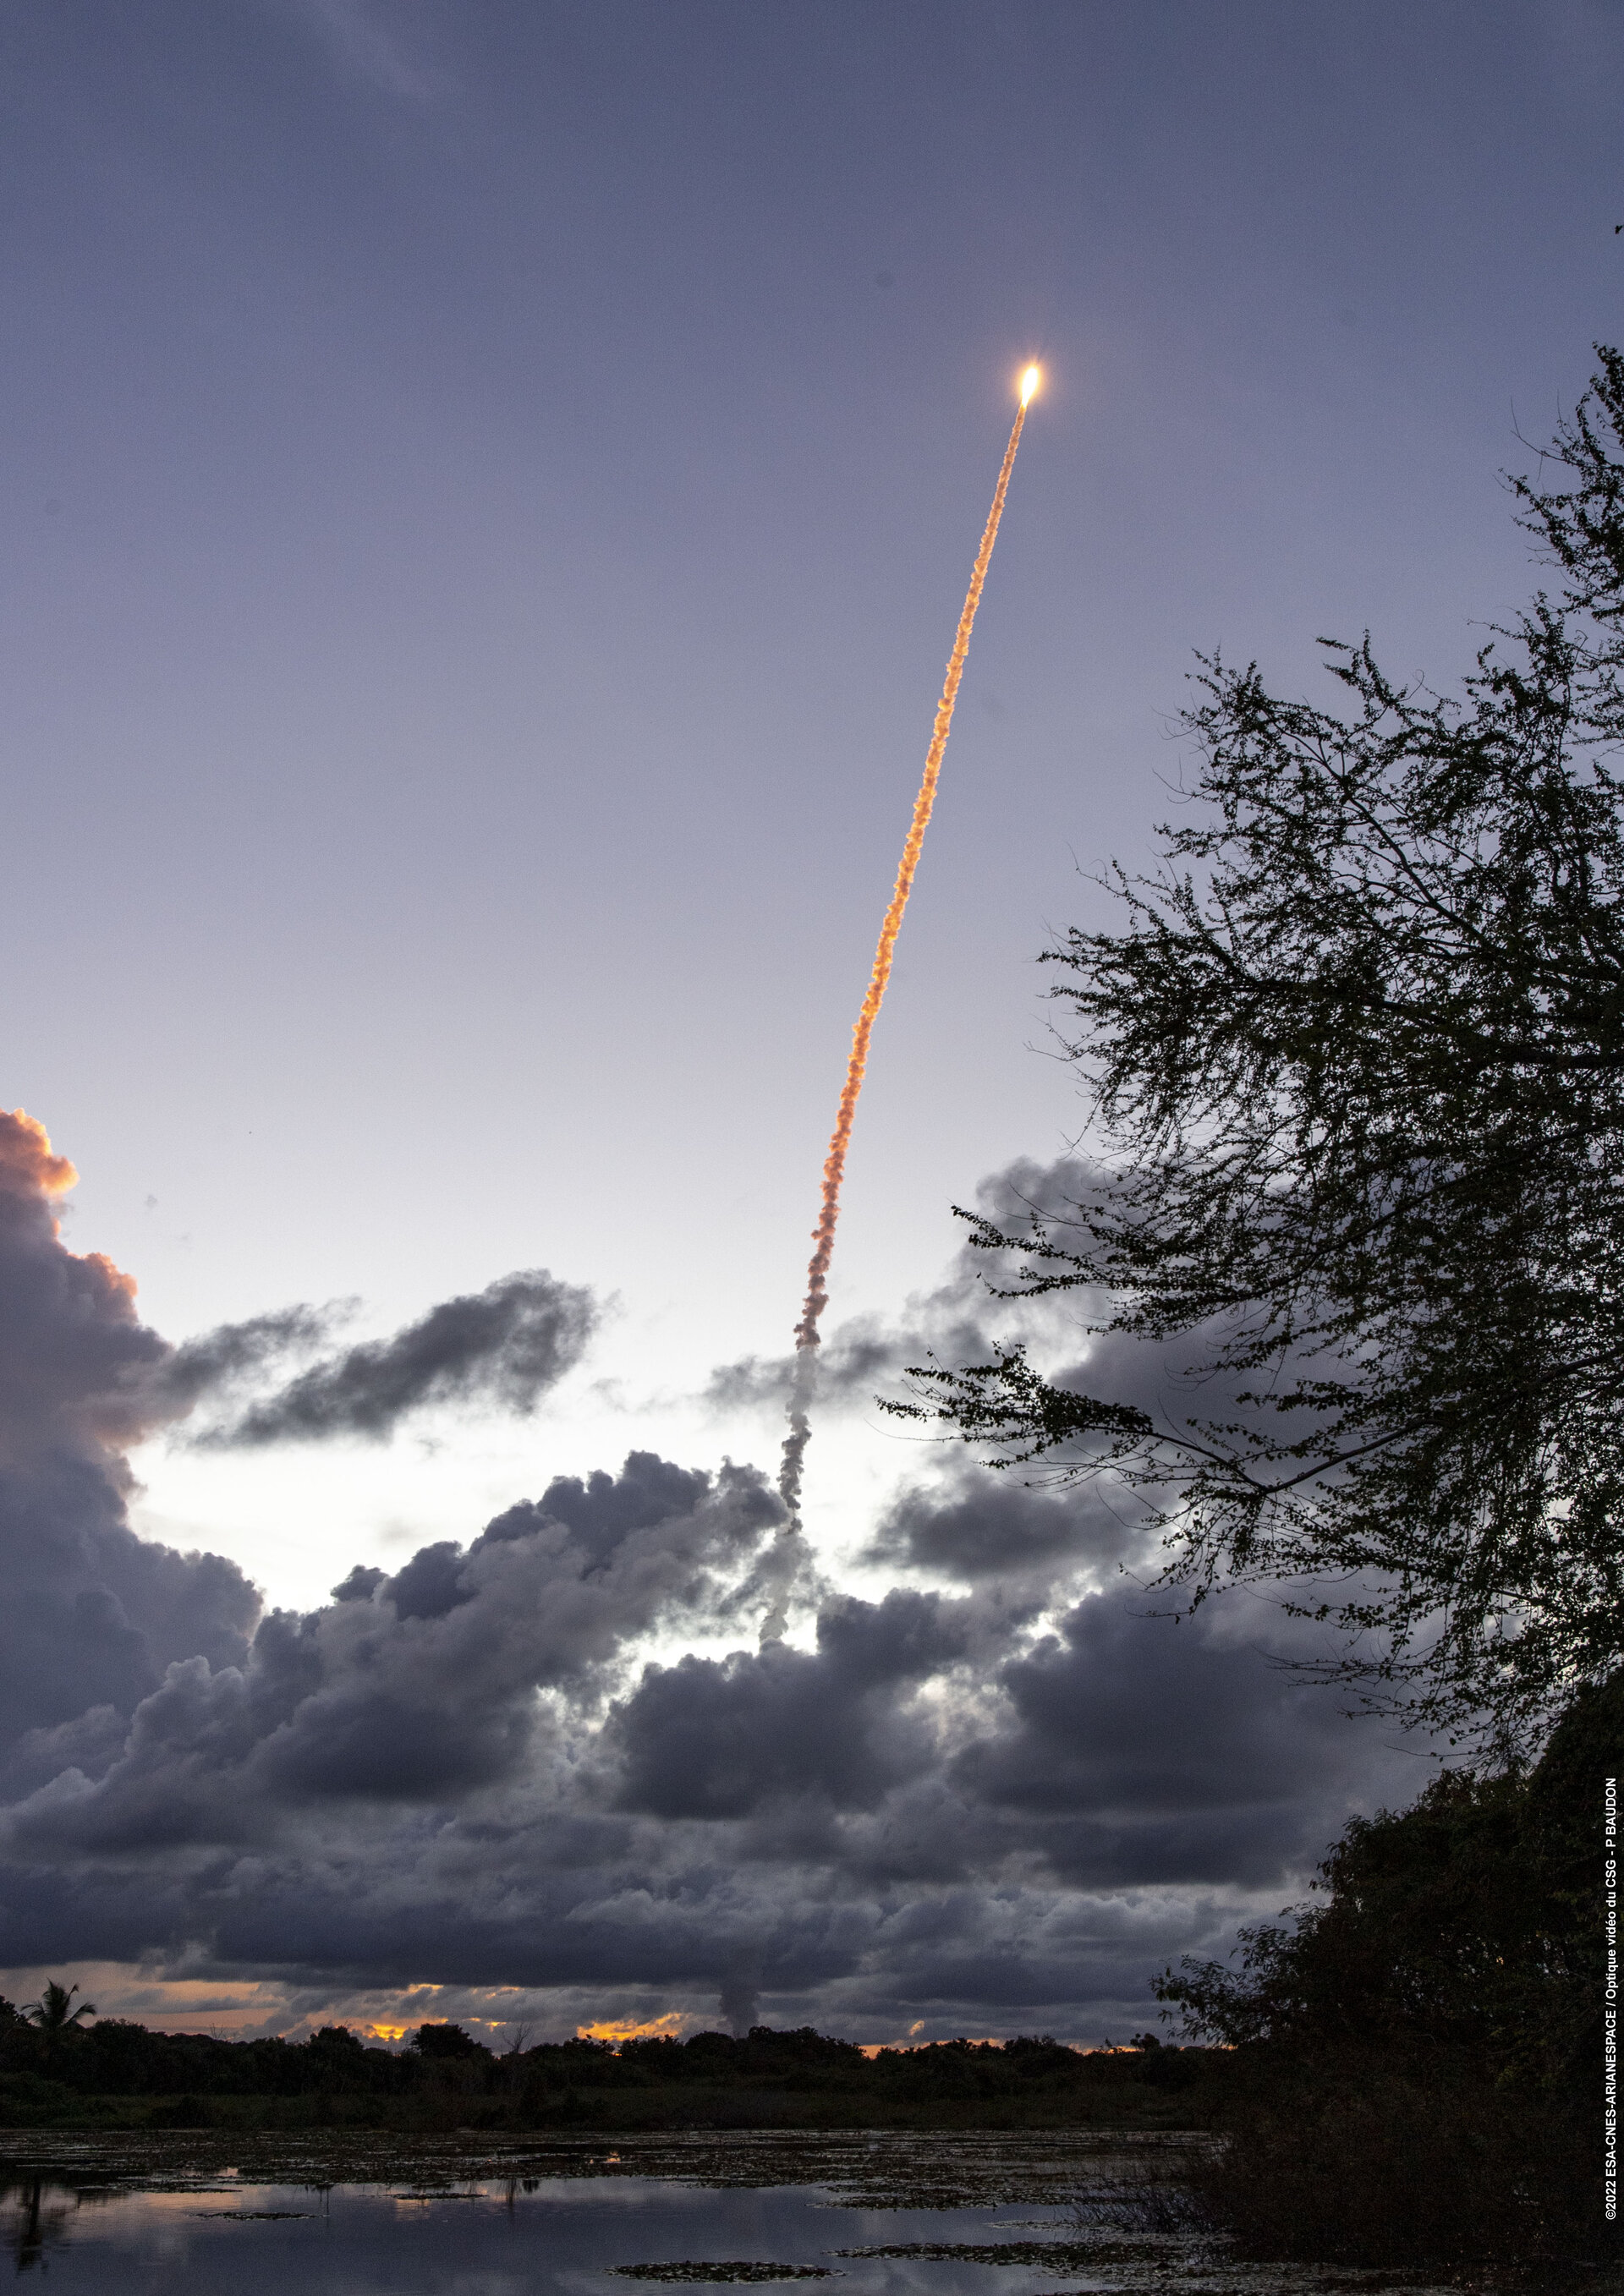 22 June 2022: Flight VA257, Ariane 5's first launch of 2022, carried two telecommunications satellites, MEASAT-3d and GSAT-24 to geostationary transfer orbit from Europe's Spaceport in French Guiana